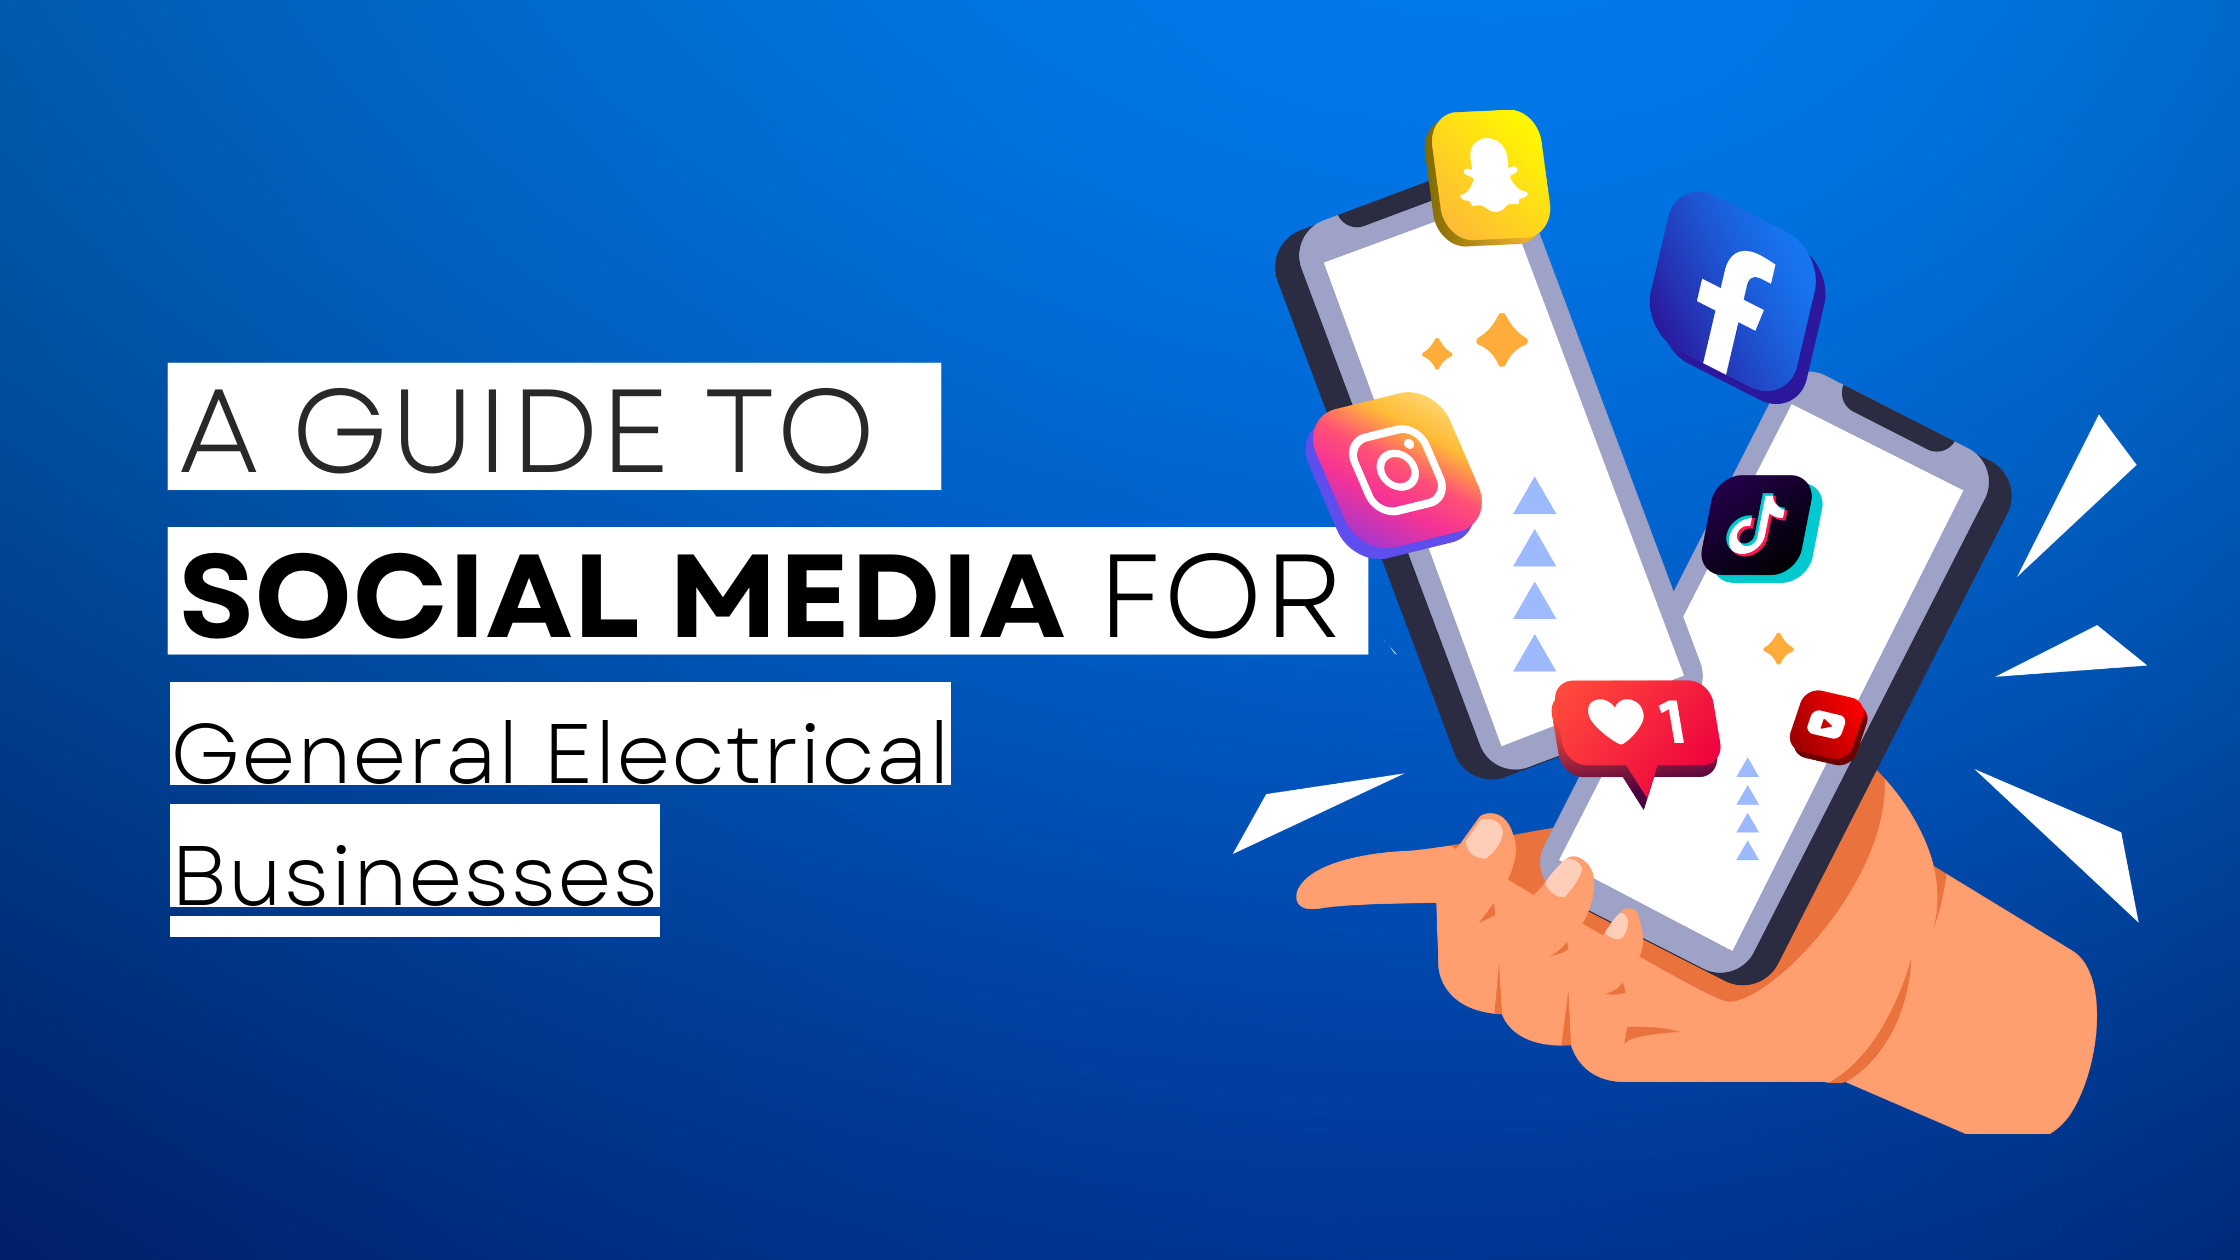 How to start General Electrical on social media